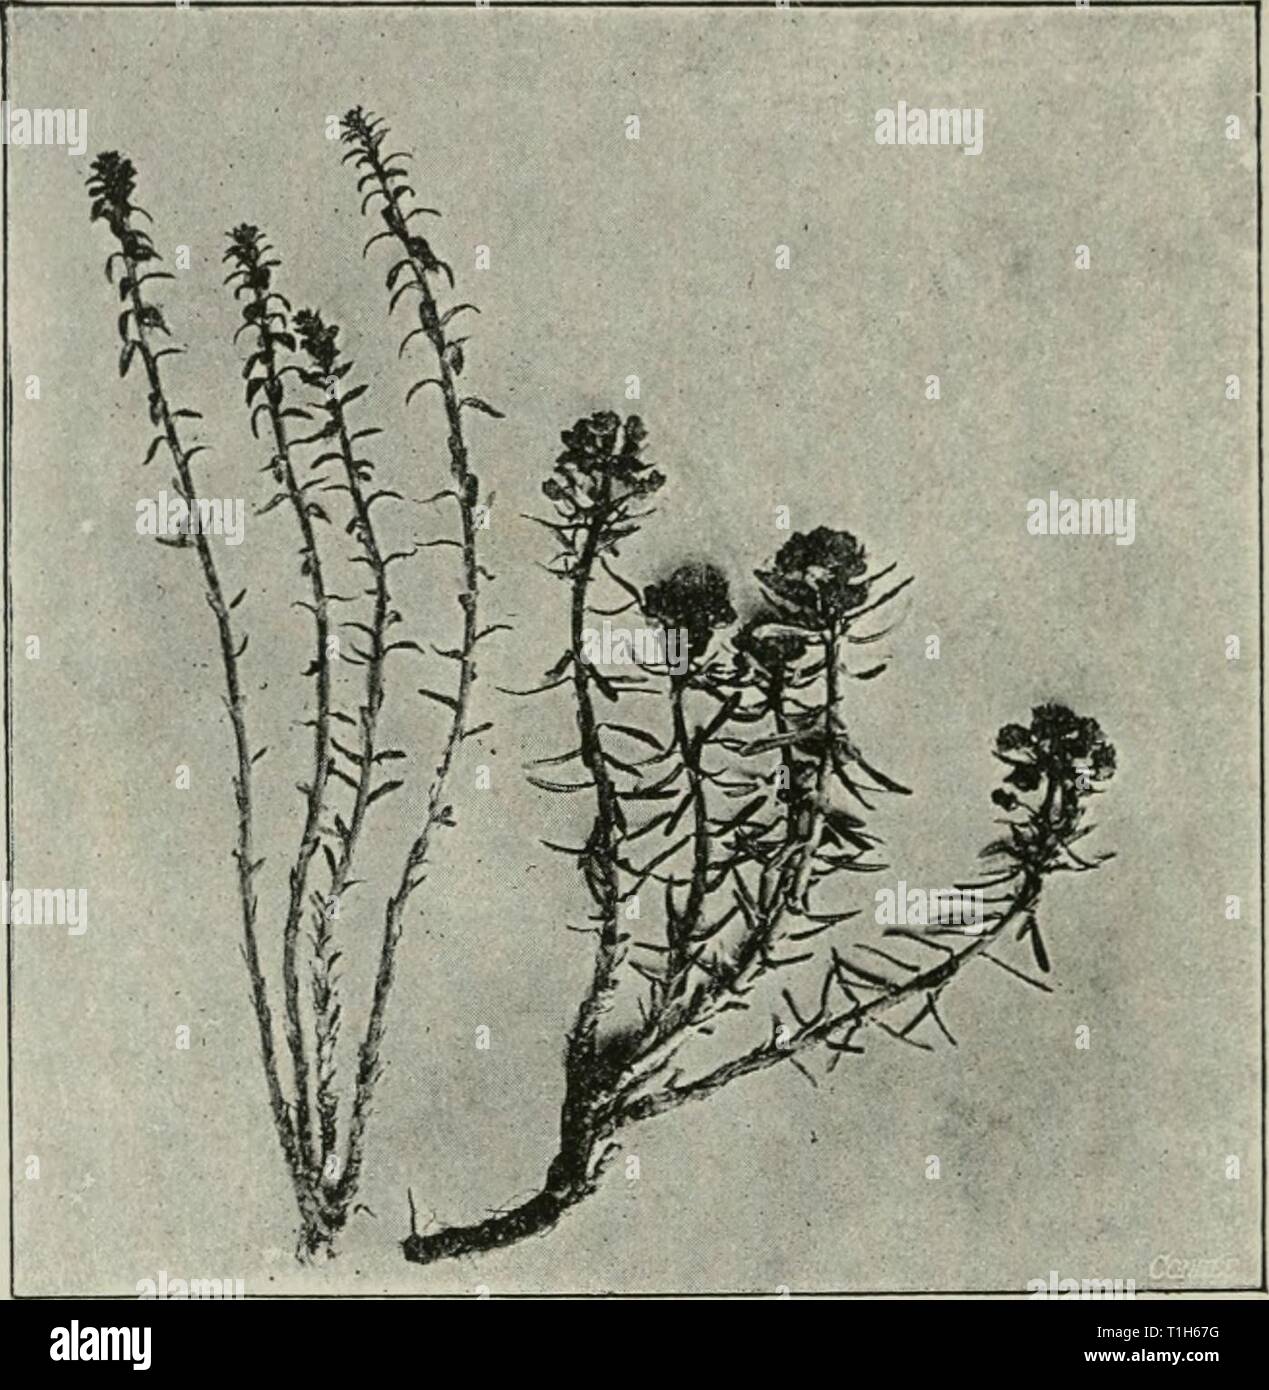 Diseases of plants induced by Diseases of plants induced by cryptogamic parasites; introduction to the study of pathogenic Fungi, slime-Fungi, bacteria, & Algae  diseasesofplant00tube Year: 1897  24 REACTION OF HOST TO PARASITKJ ATTACK. True atrophy is best seen in those cases where flower-forma- tion is suppressed. This effect of parasitic fungi on their host is by no means uncommon, the fungus alone reproducing itself, while the assimilating host-plant remains sterile. This atrophy is found not only in annual plants, but also in those where the symbiosis might be designated as perennial. The Stock Photo